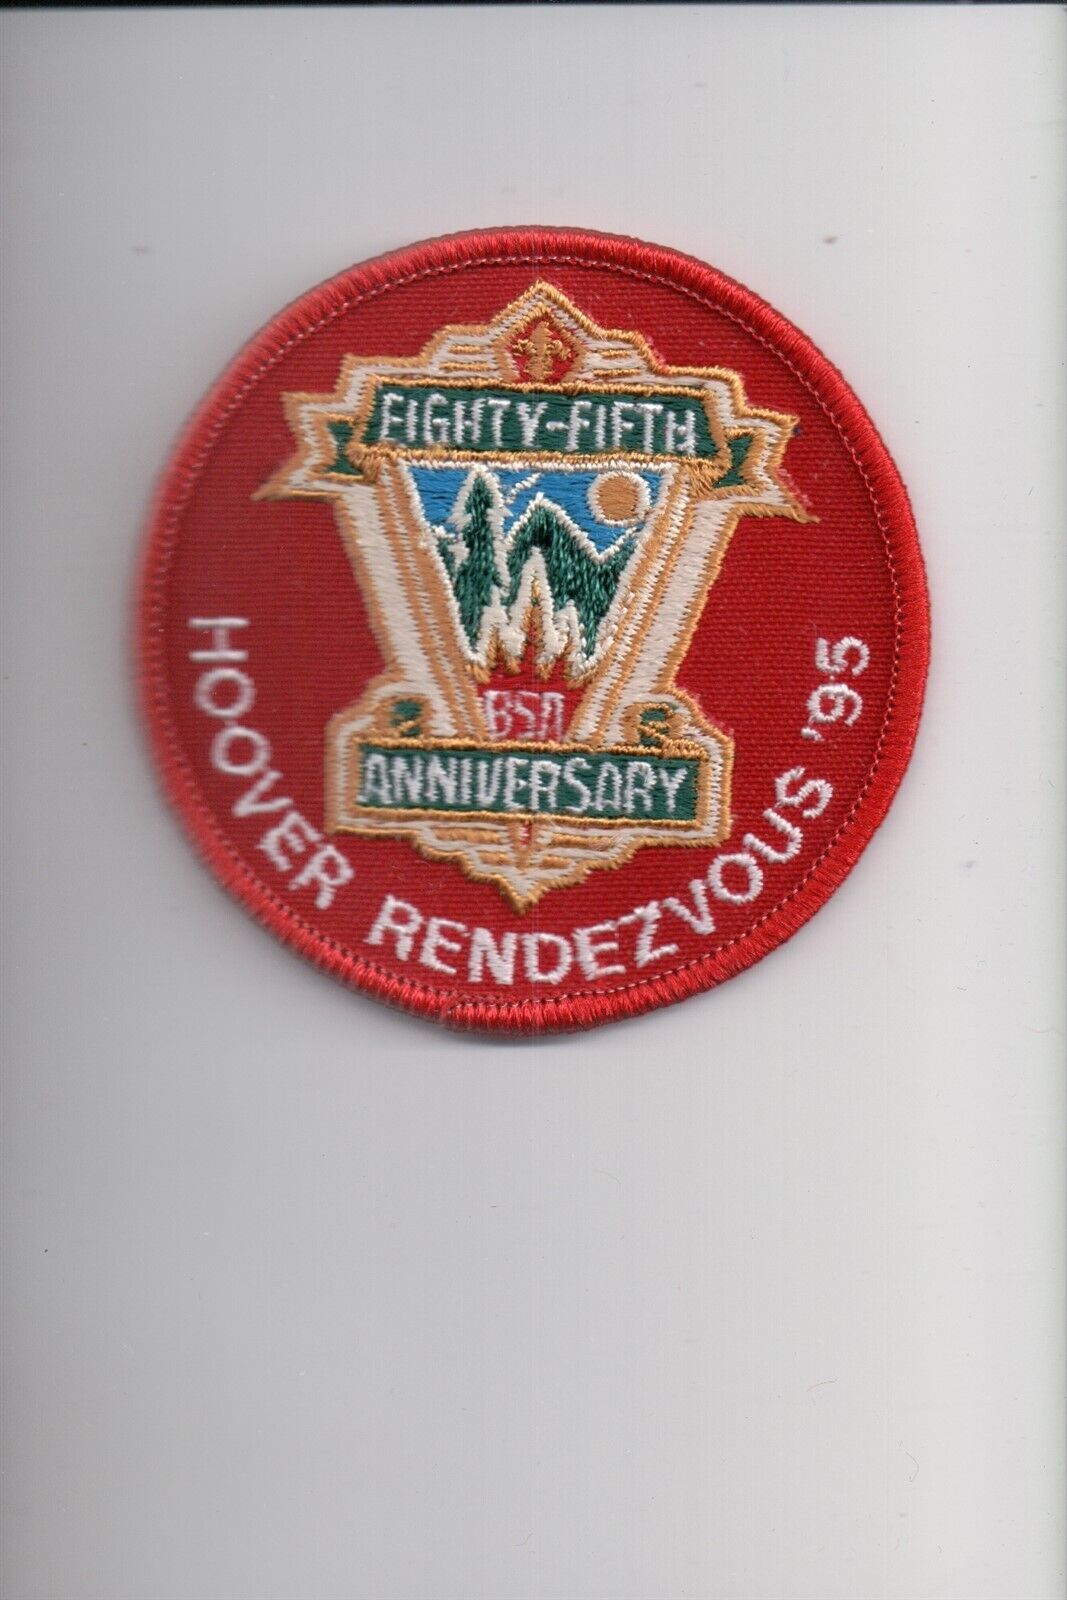 1985 Hoover Rendezvous 85th Anniversary patch